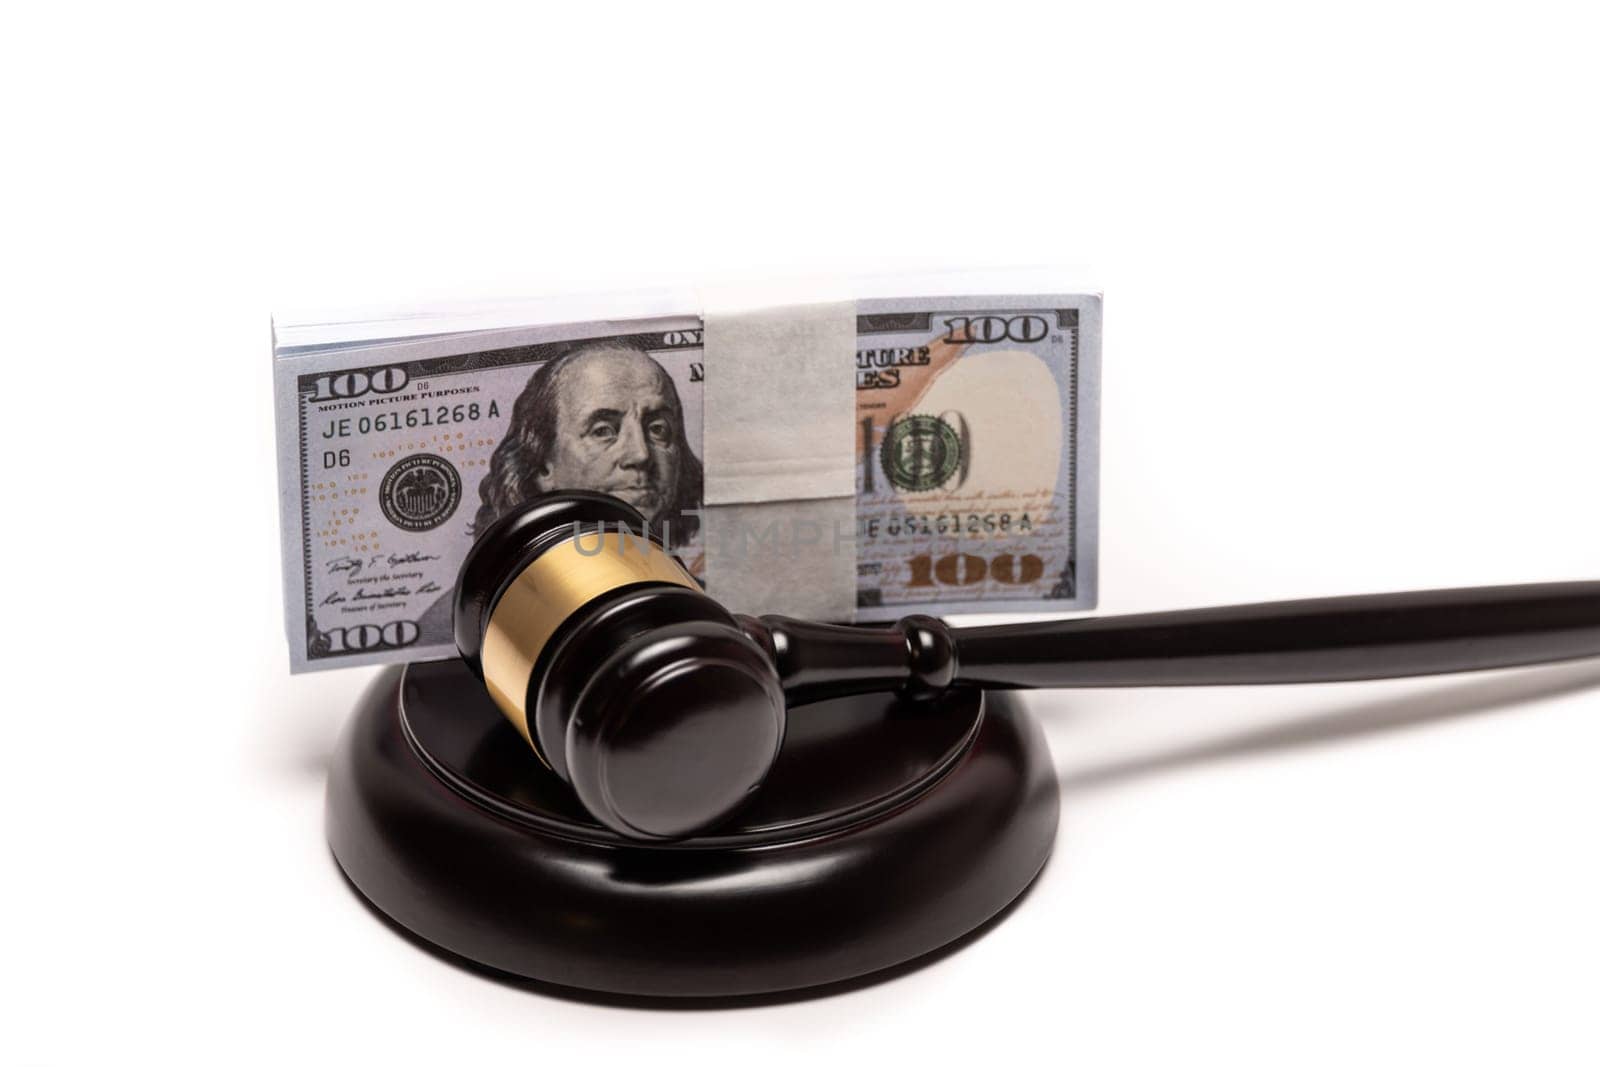 Gavel and Money Concept for Financial Legal Issues